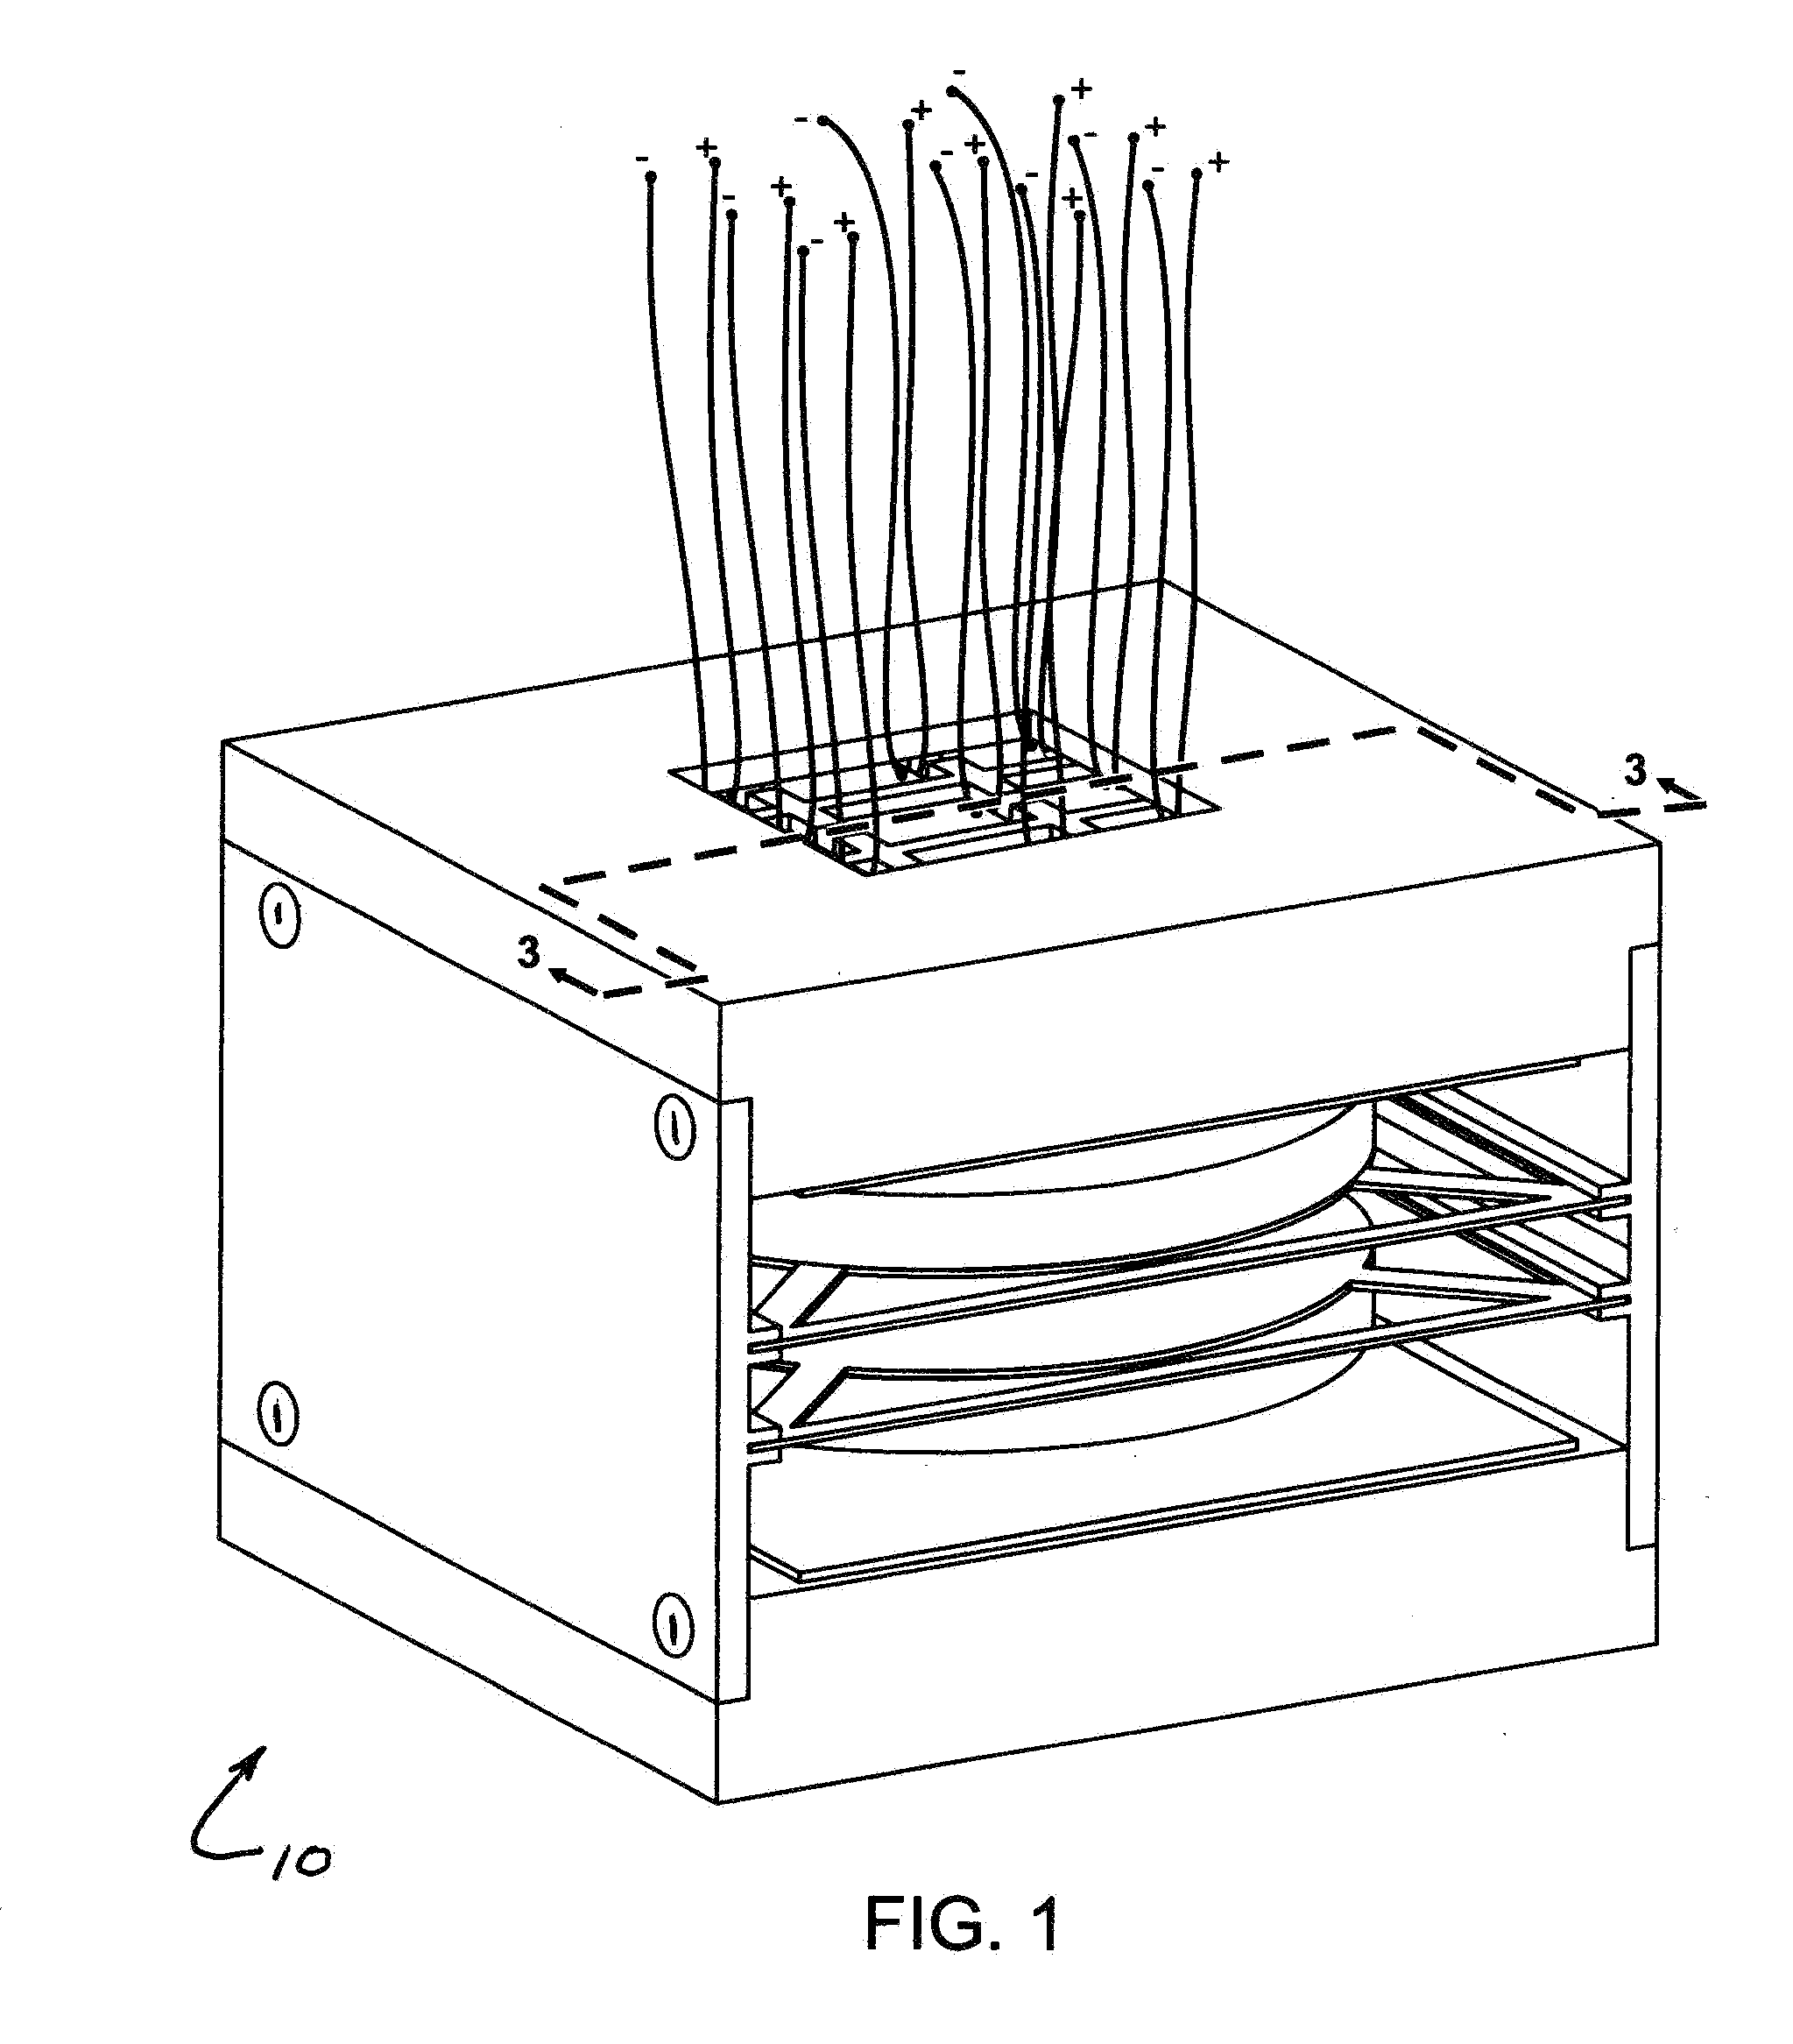 Device and Method For Harvesting Energy